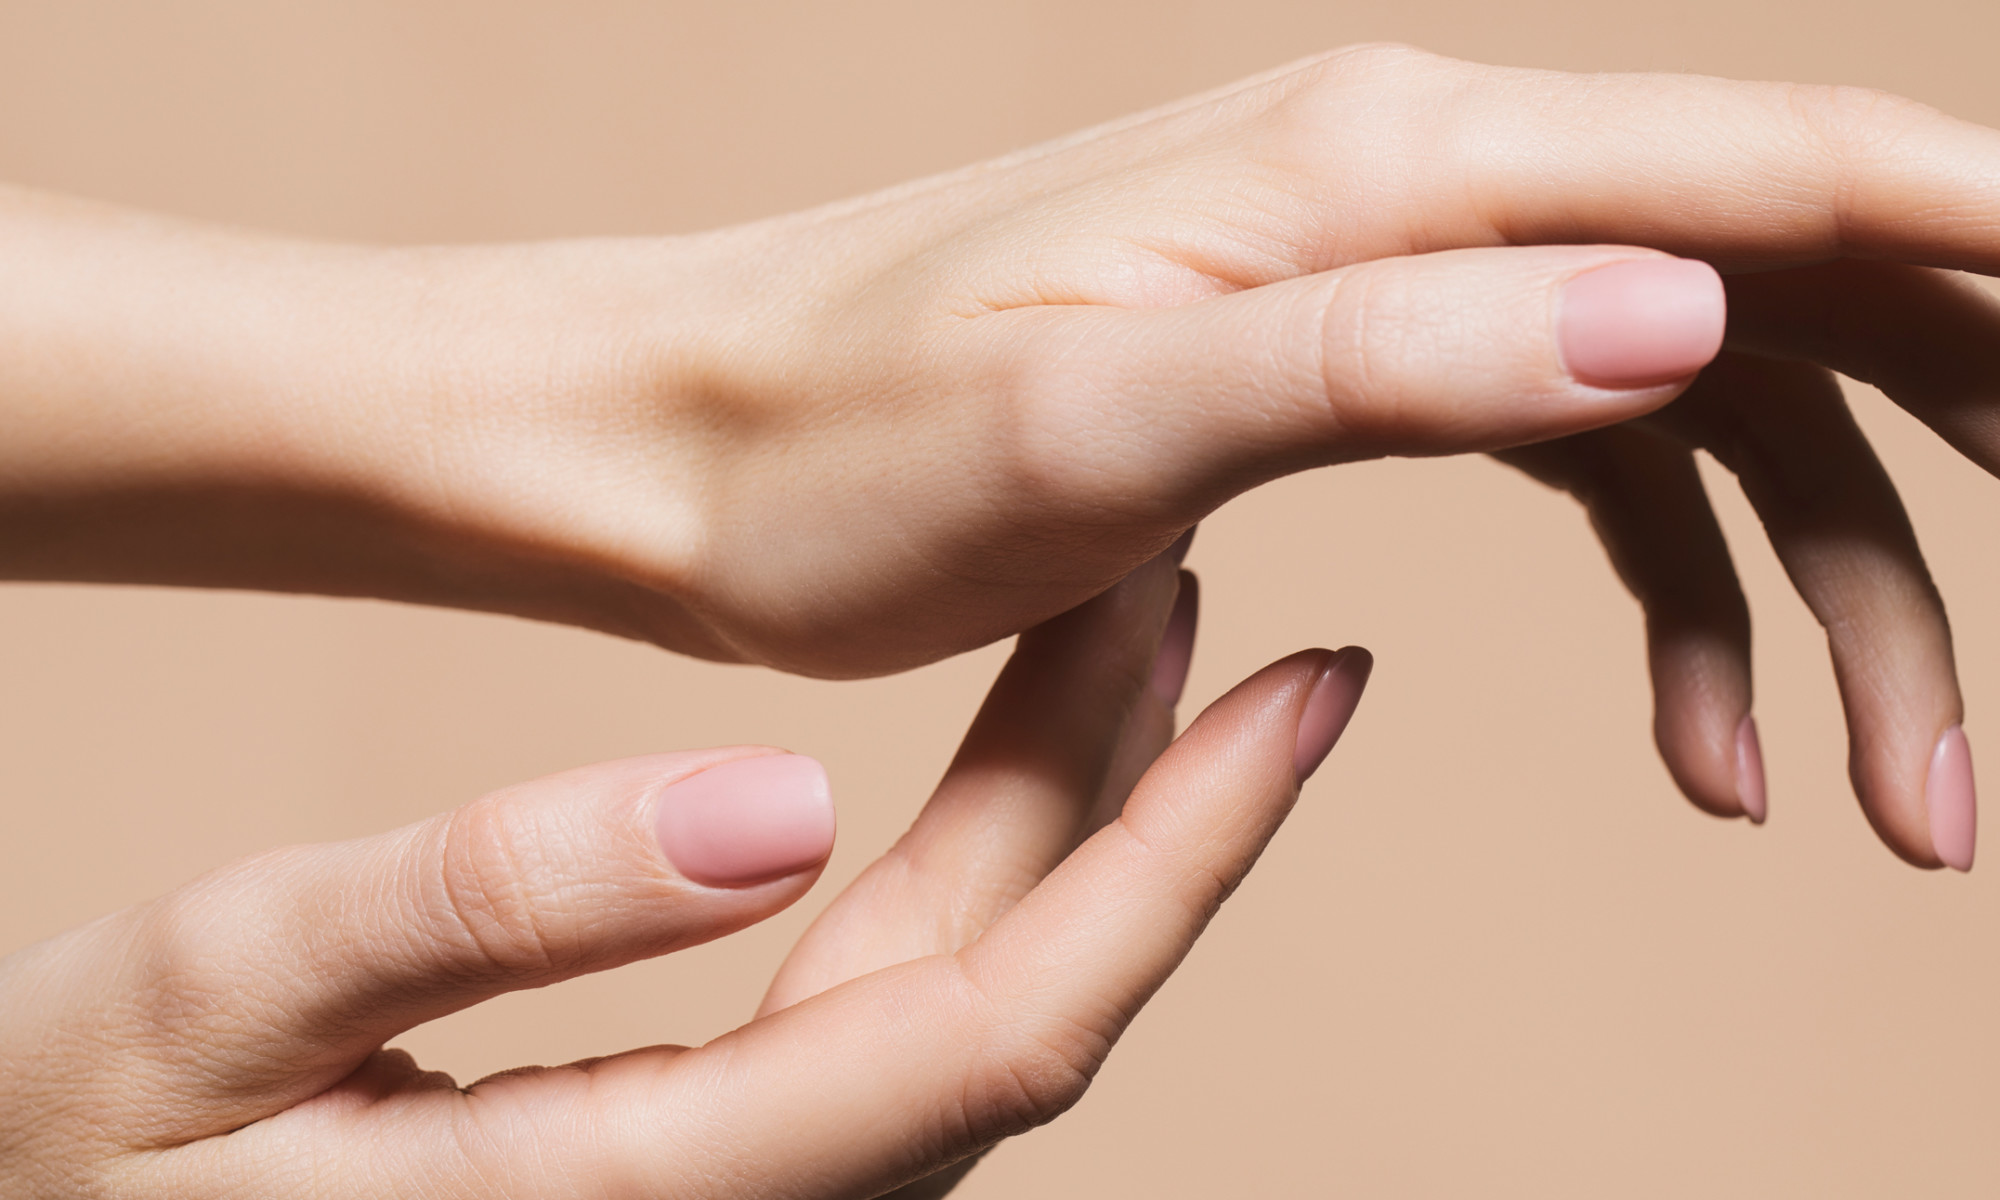 How To Dry Nails Fast: 10 Expert Tips To Cut Drying Time | mindbodygreen